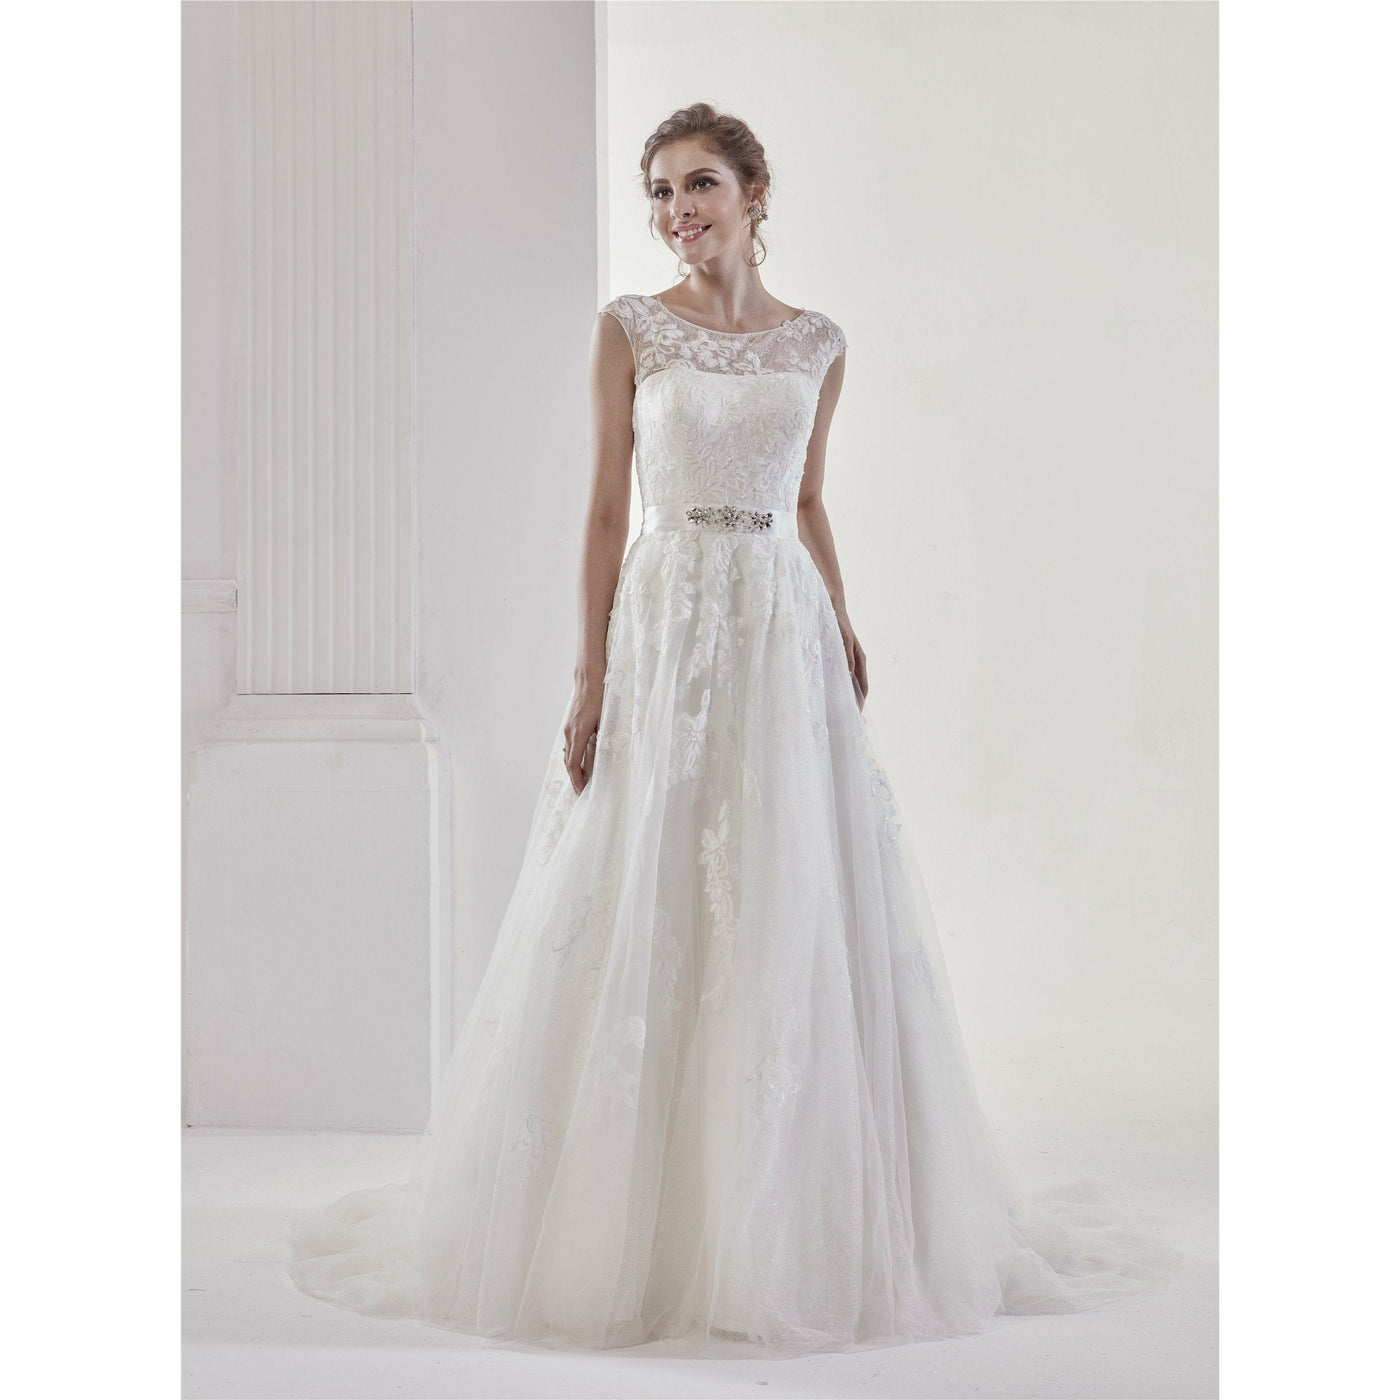 Chicely Illusion neckline Chantilly ly lace A-Line wedding dress